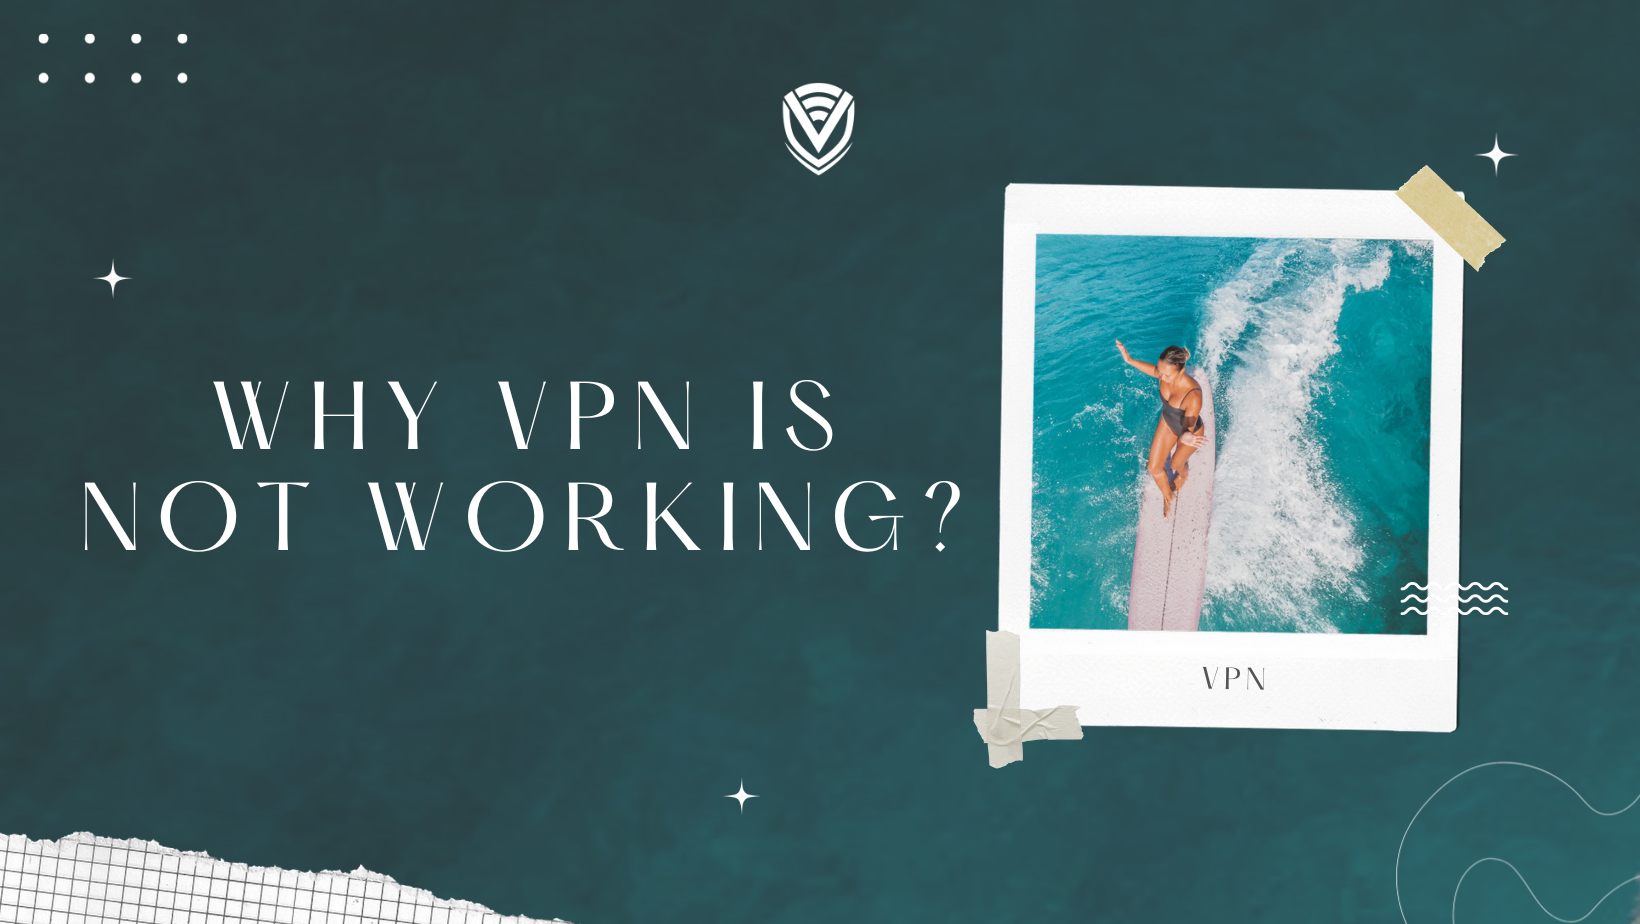 Why VPN is not working?